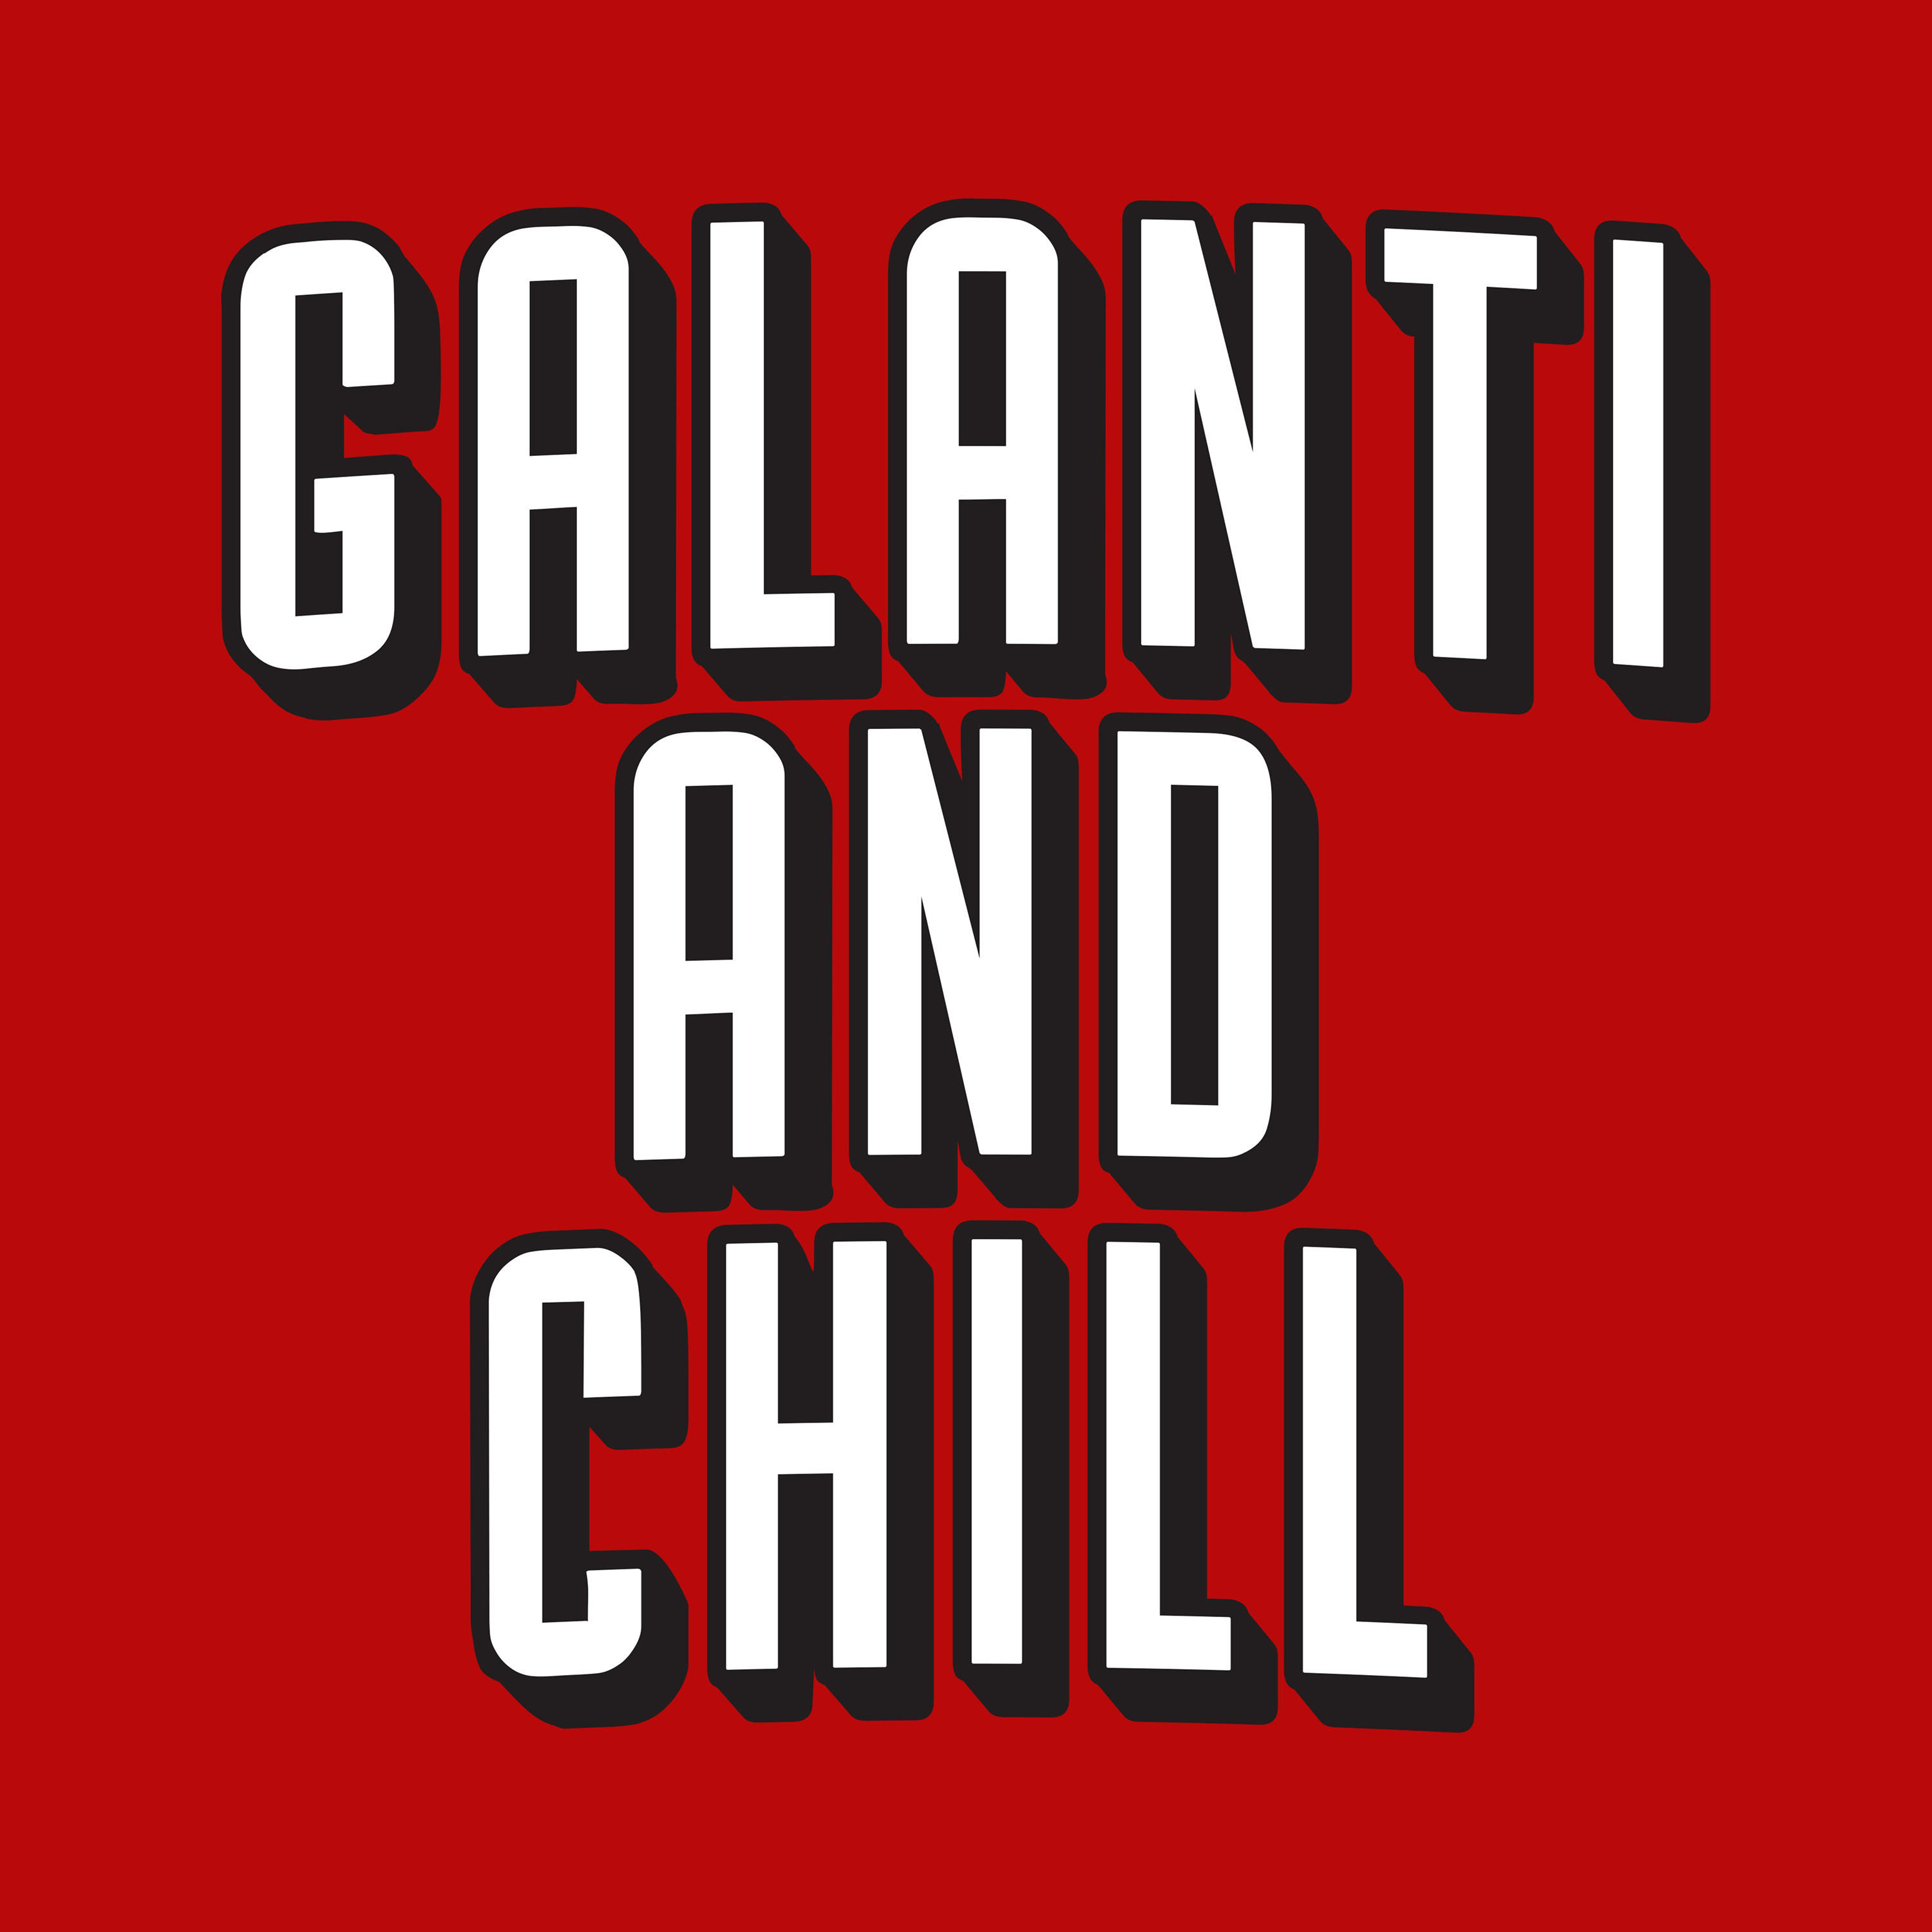 Galanti & Chill - Friday the 13th Series